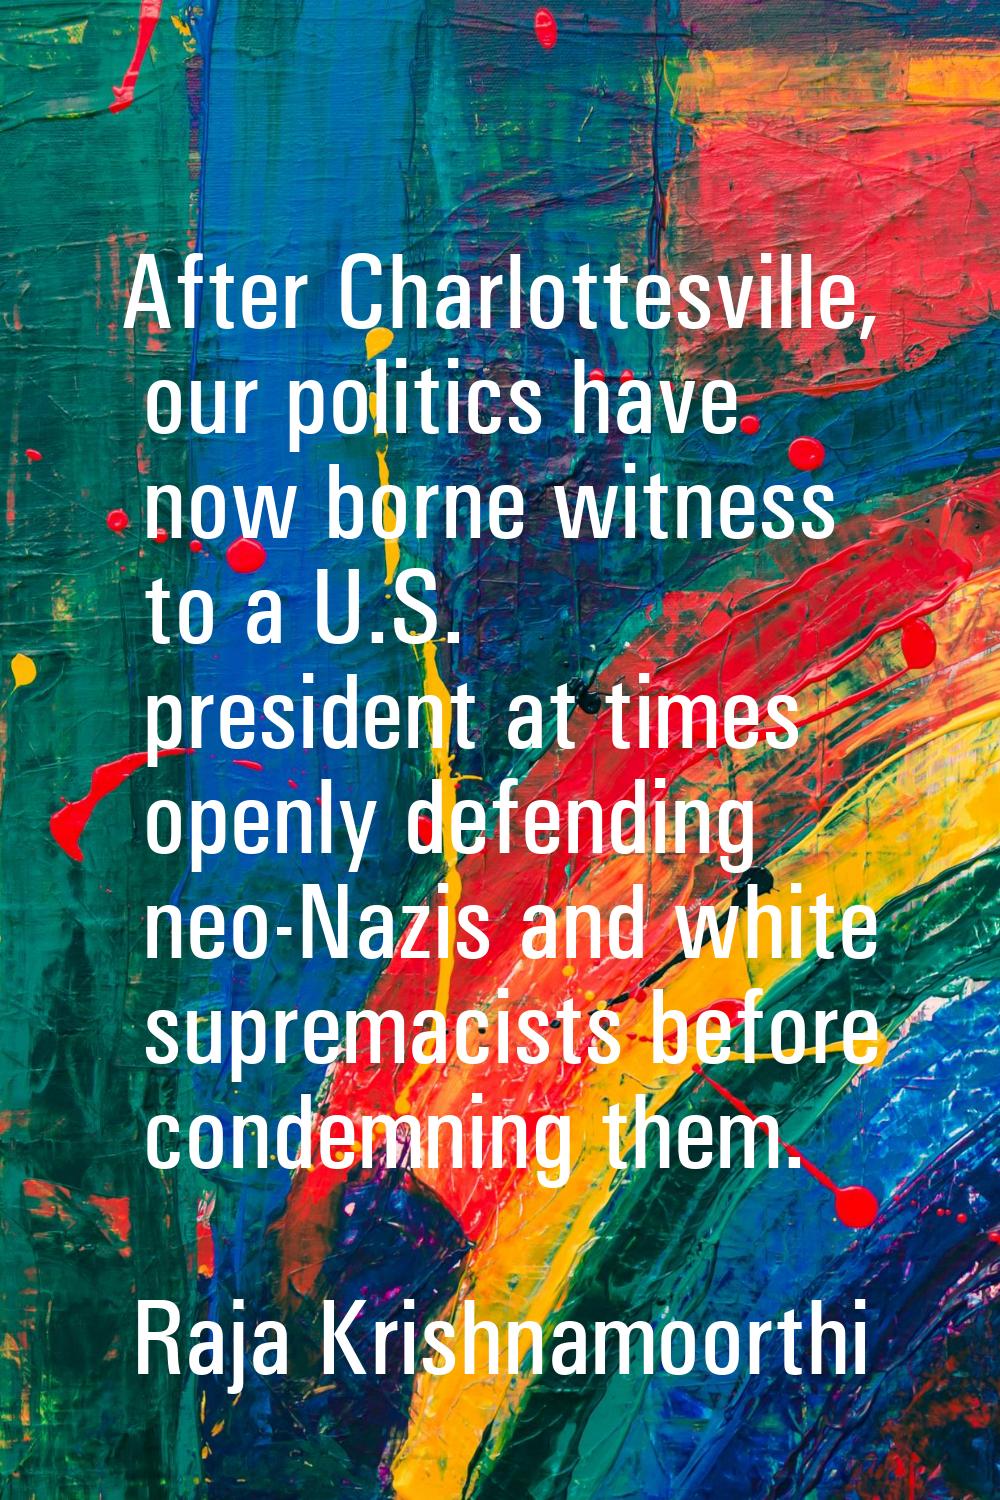 After Charlottesville, our politics have now borne witness to a U.S. president at times openly defe